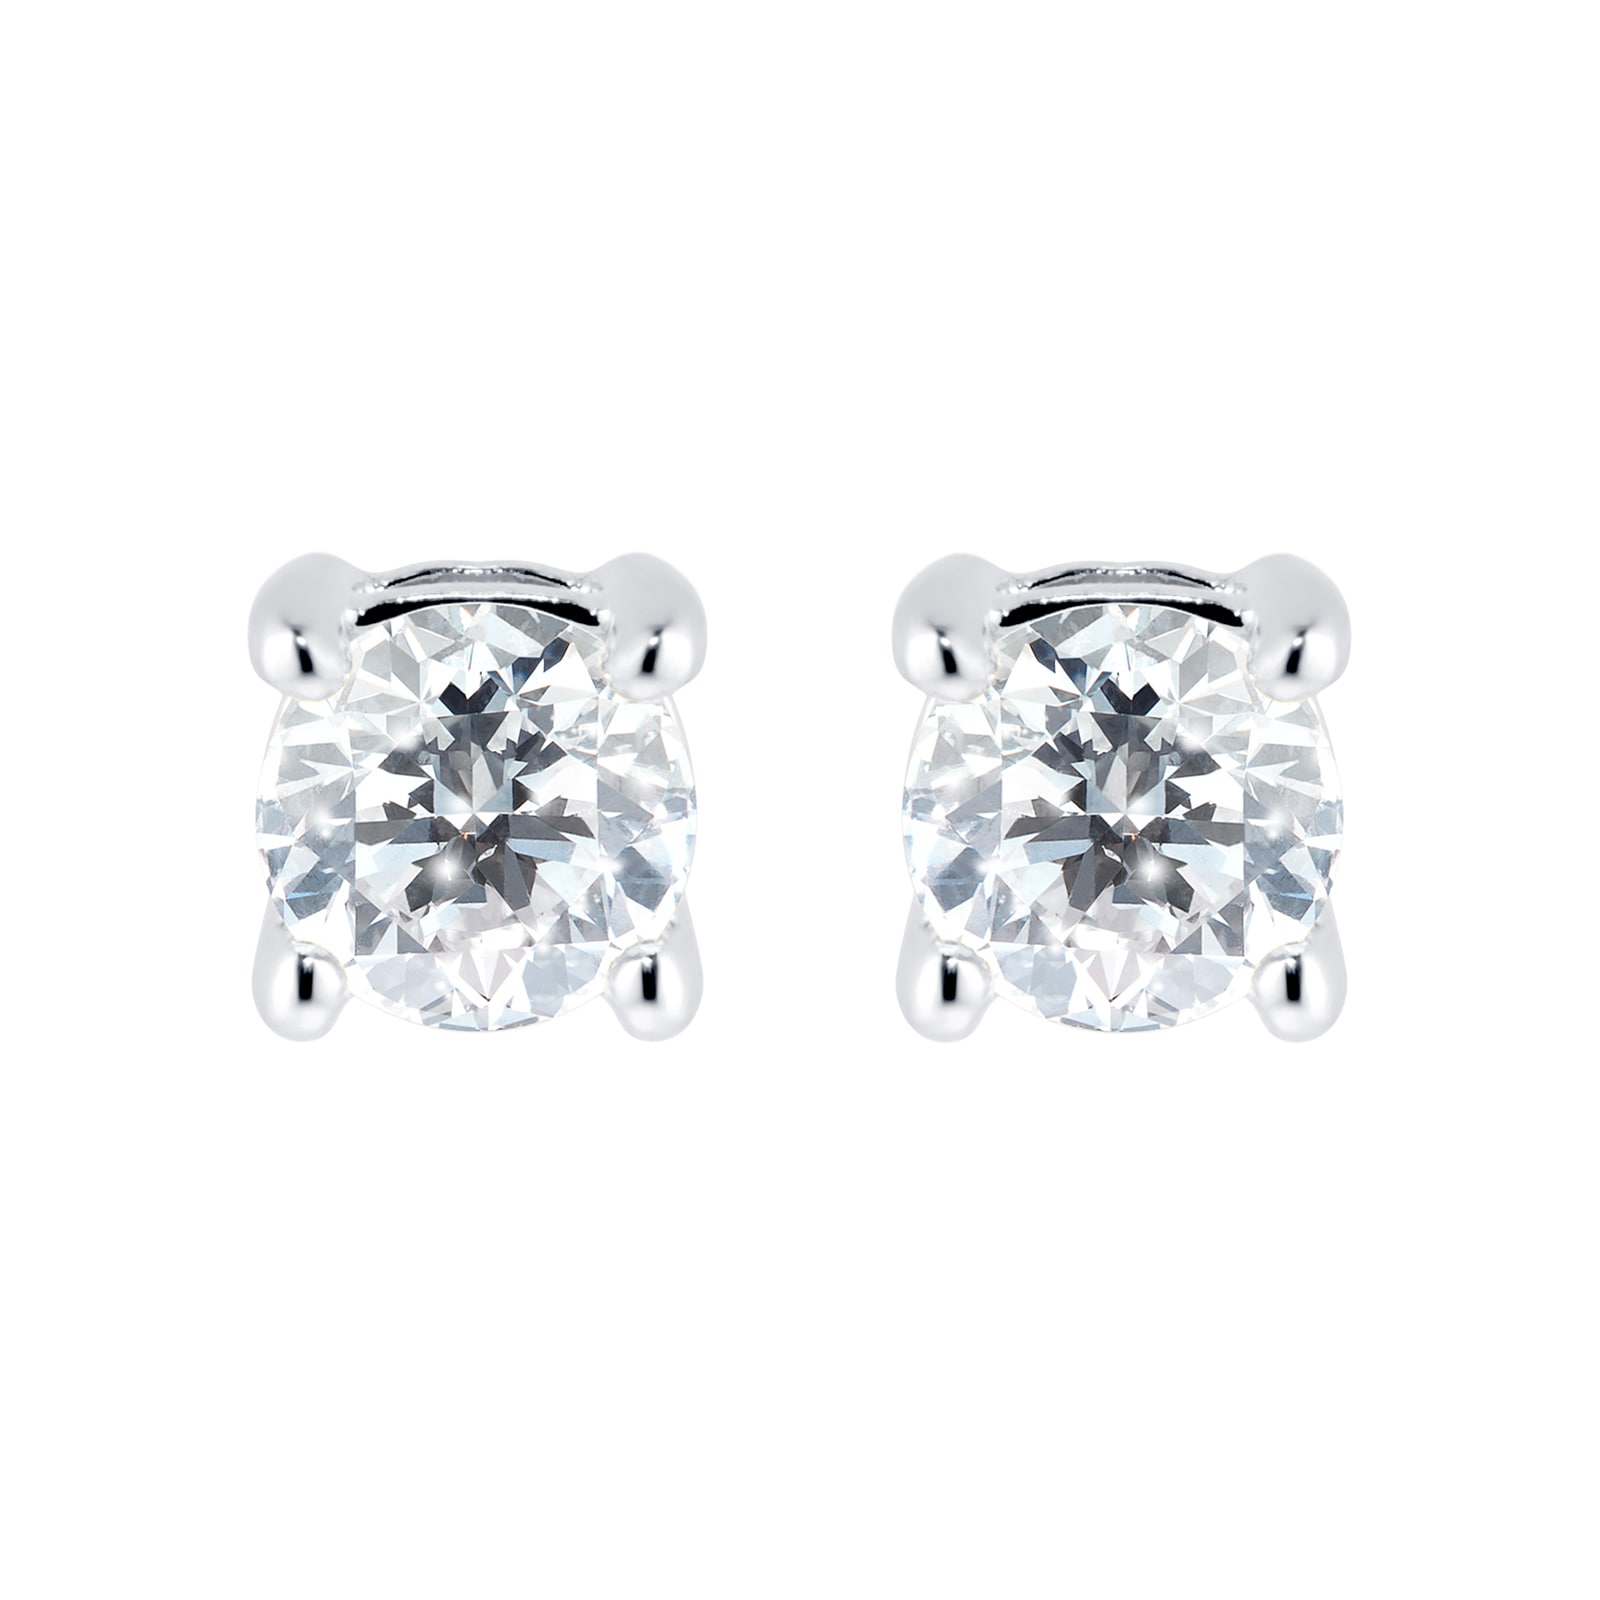 18ct White Gold 0.50ct Goldsmiths Brightest Diamond 4 Claw Stud Earrings